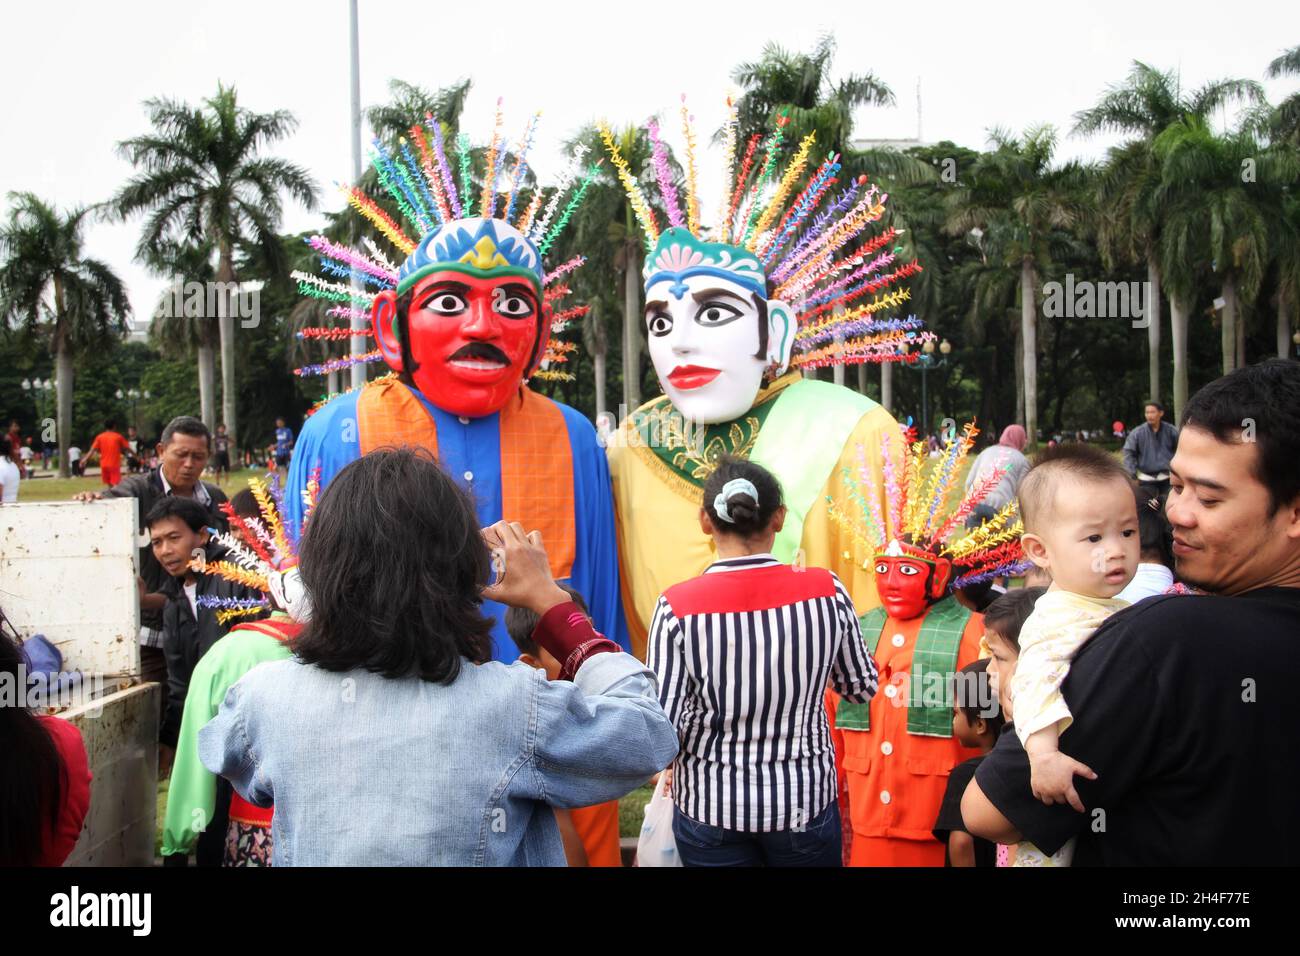 Ondel-Ondel. Large Puppets from Betawi, Jakarta, Indonesia. Stock Photo